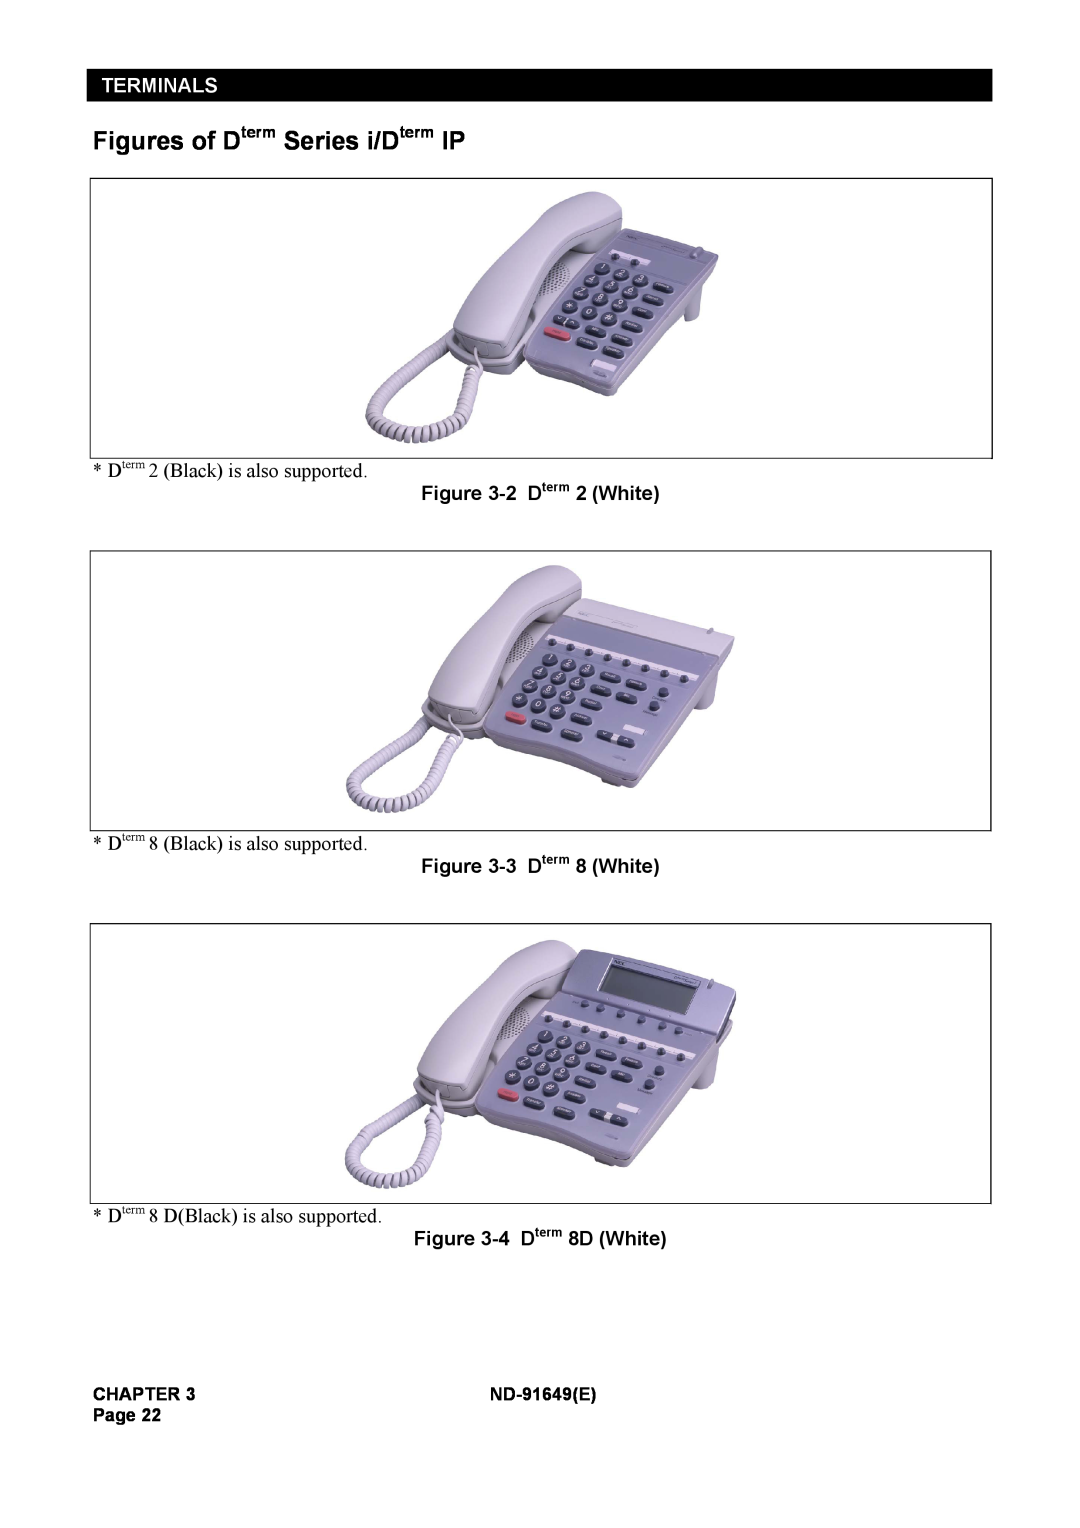 NEC ND-91649 Figures of Dterm Series i/Dterm IP, Terminals, 2 Dterm 2 White, 3 Dterm 8 White, 4 Dterm 8D White, Chapter 